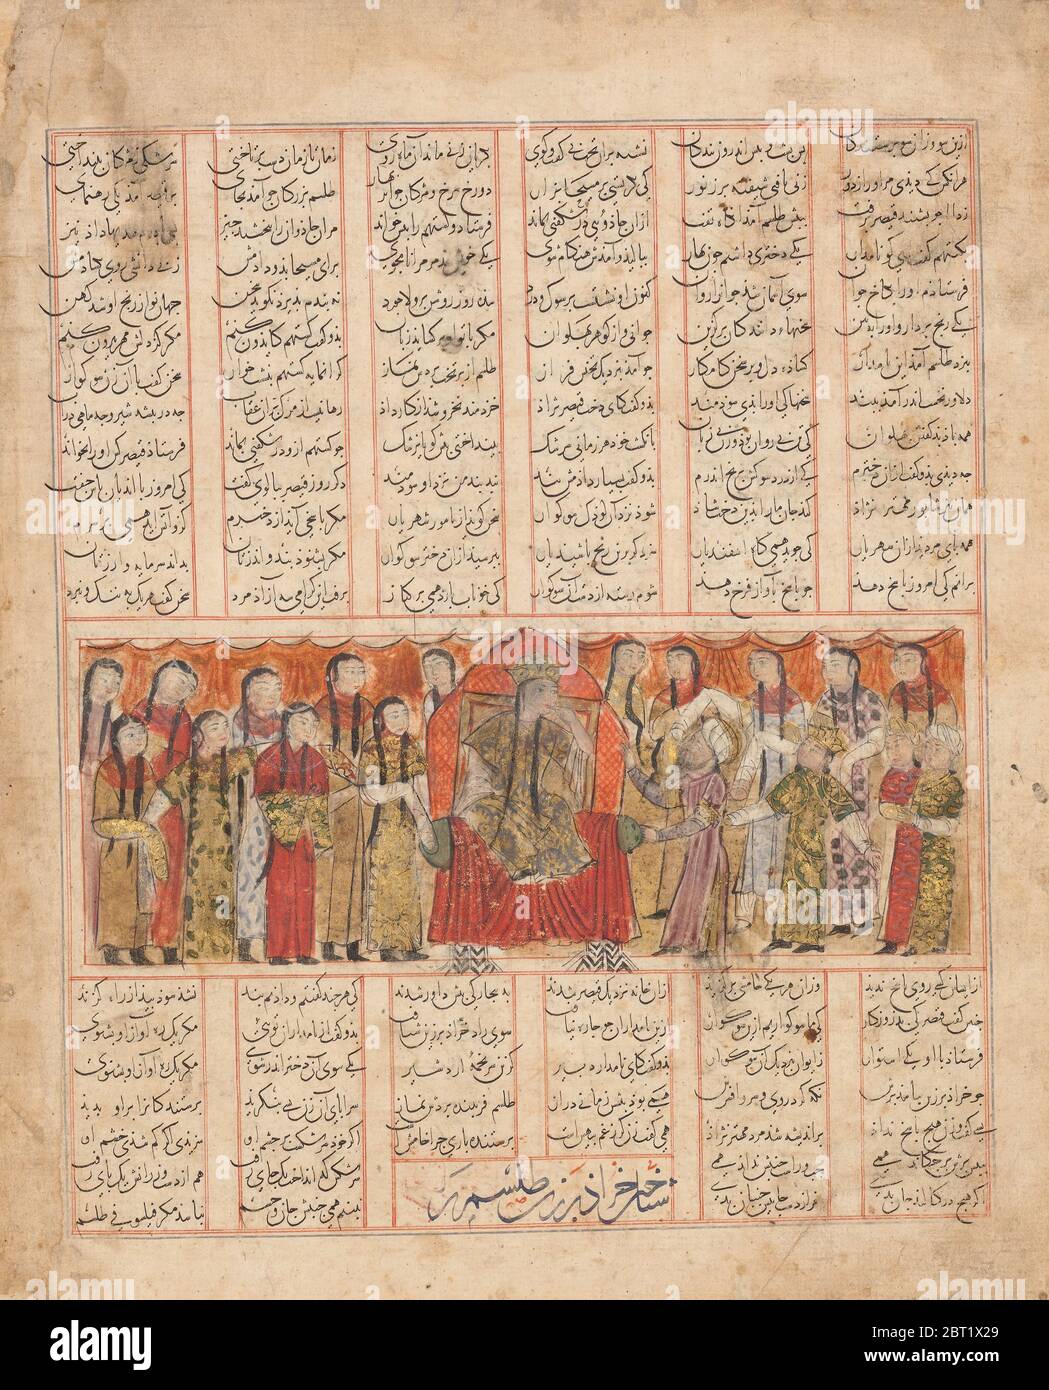 Kharrad Recognizes the Princess&quot; as being an Automaton&quot;, Folio from a Shahnama (Book of Kings), dated A.H. 741/A.D. 1341. Stock Photo